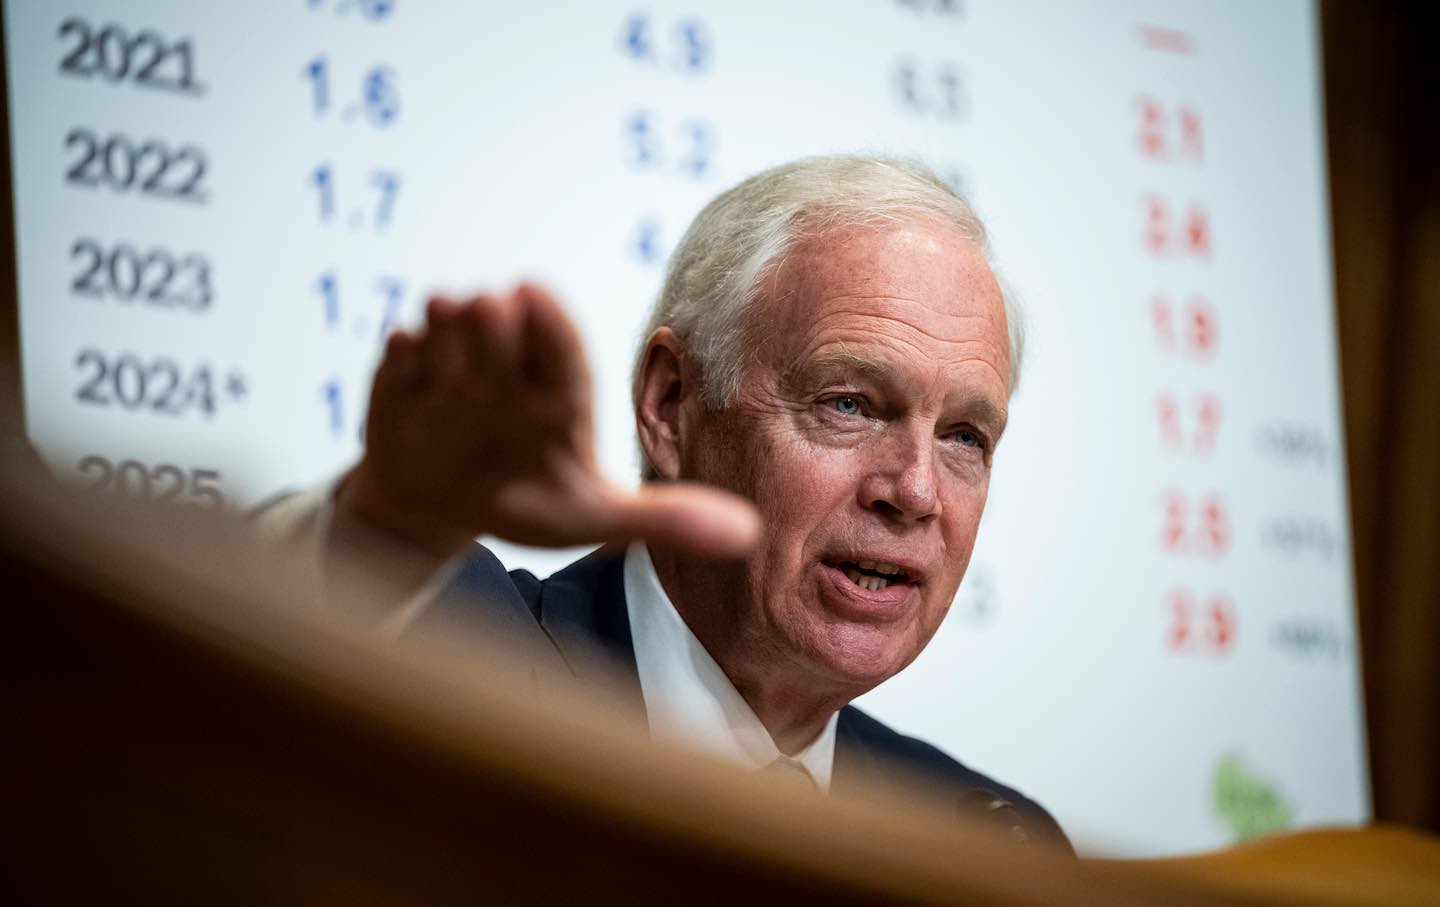 Senator Ron Johnson, a Republican from Wisconsin, during a Senate Budget Committee hearing in Washington, D.C., on March 12.